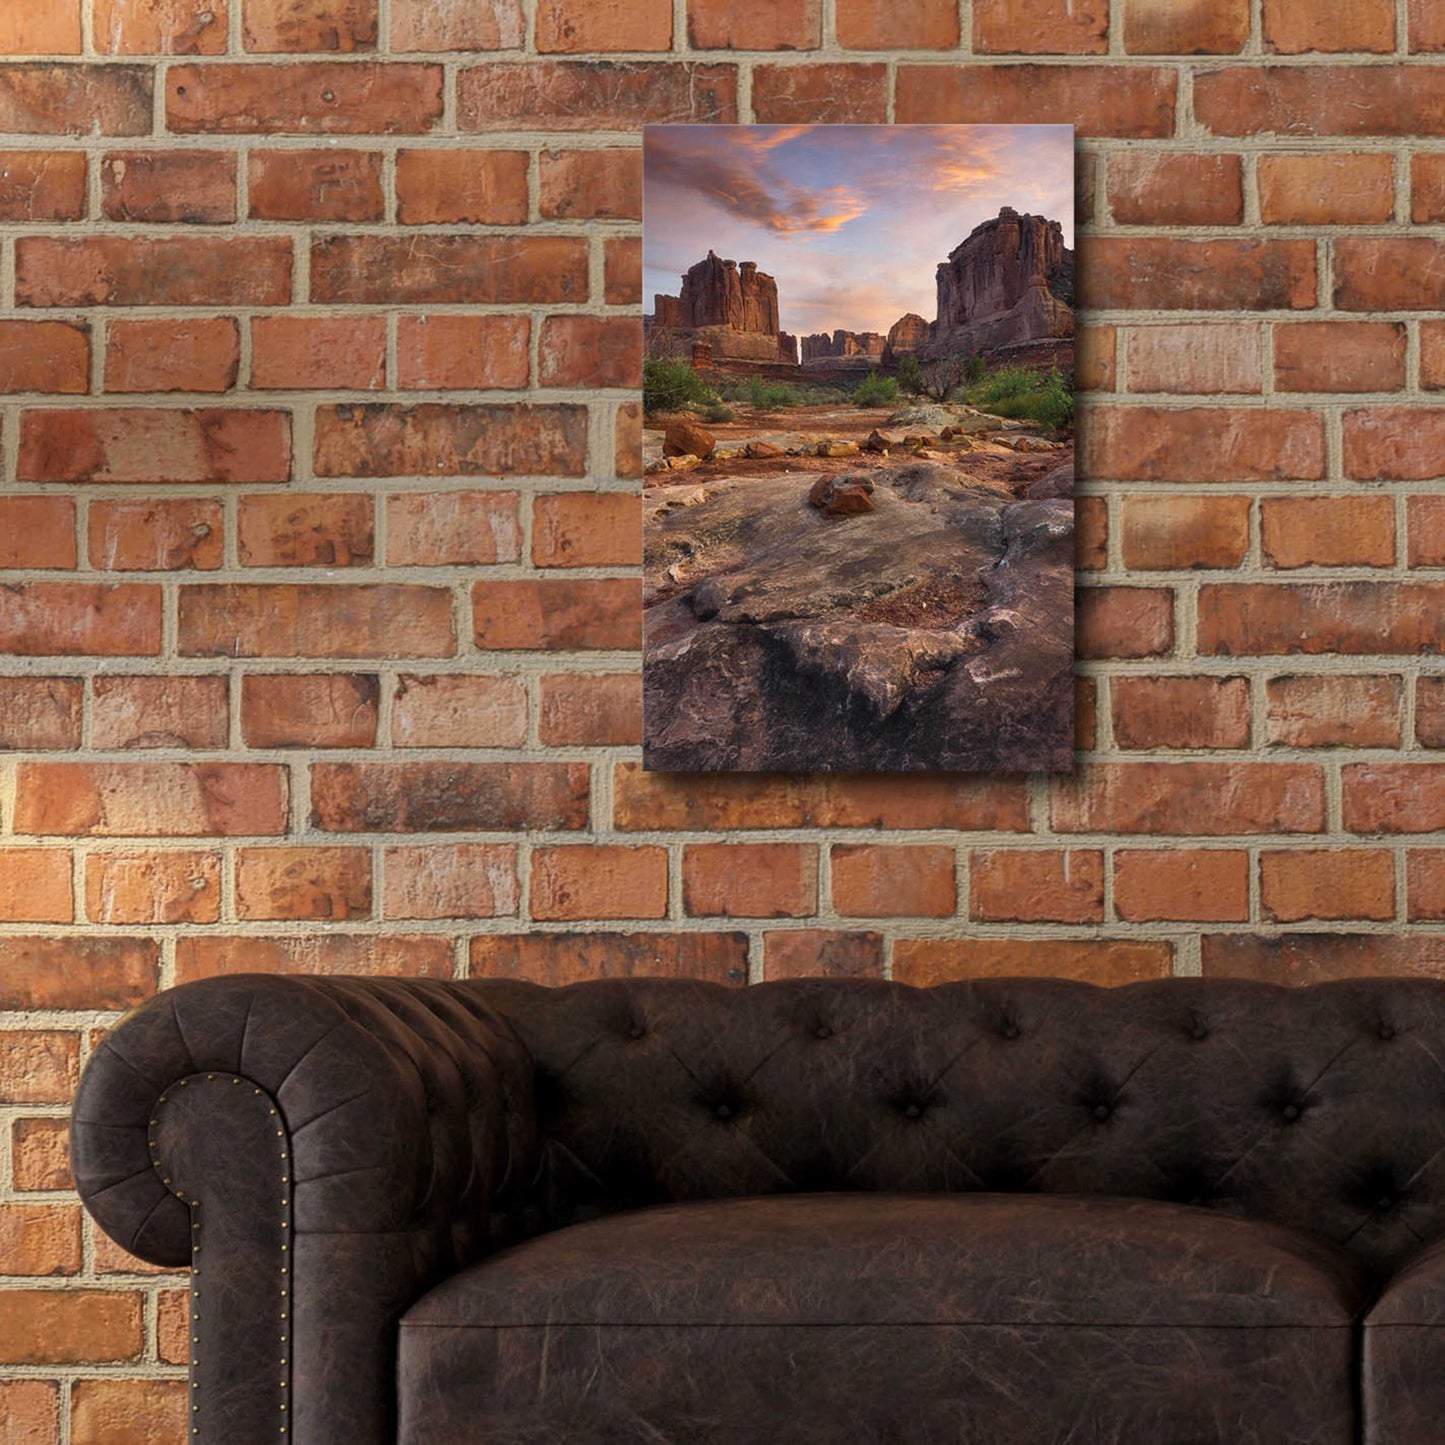 Epic Art 'Park Avenue Sunset - Arches National Park' by Darren White, Acrylic Glass Wall Art,16x24